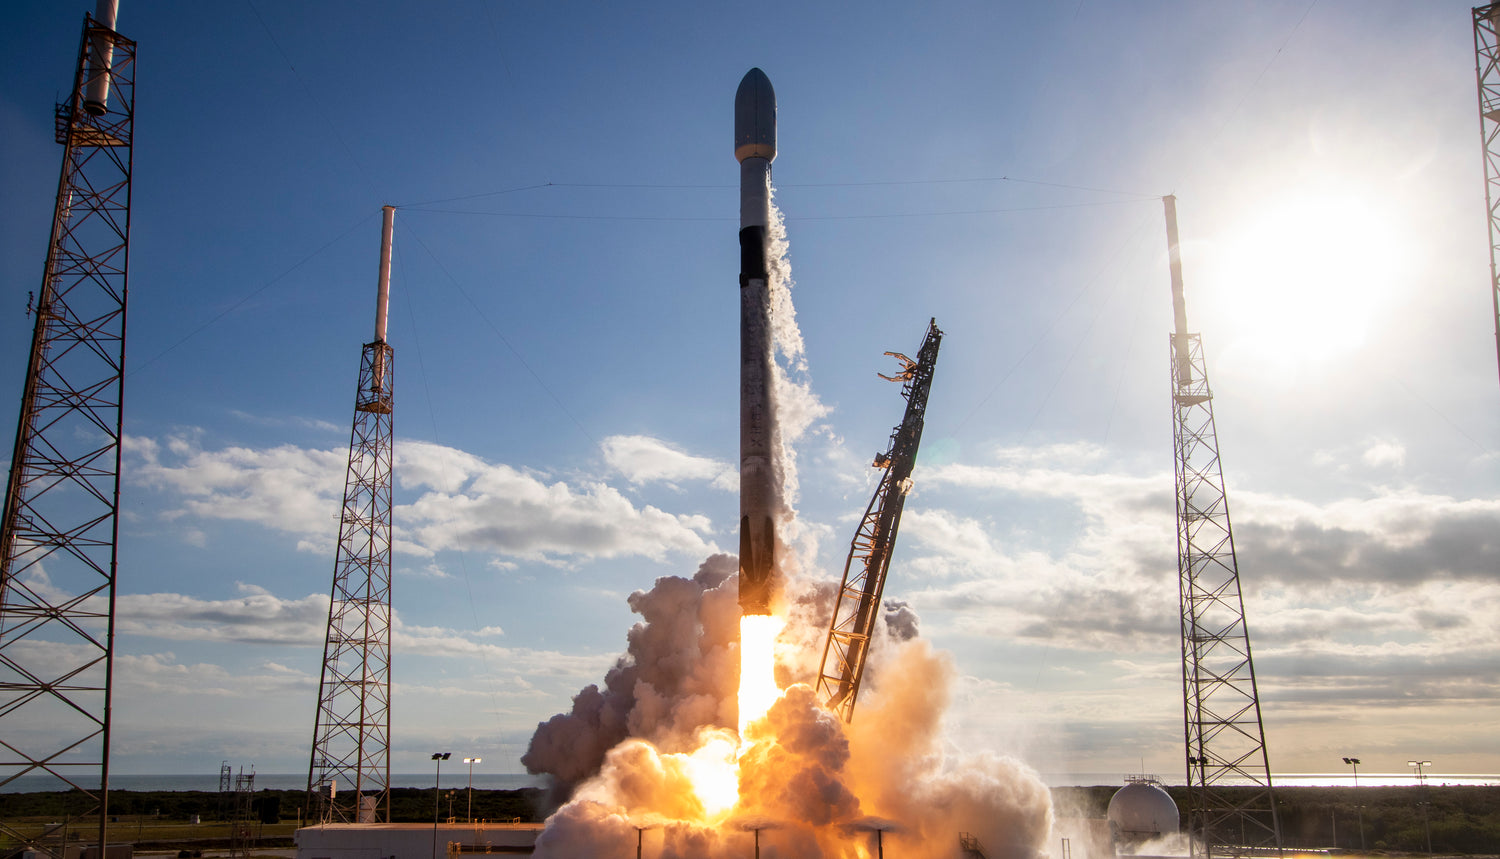 SpaceX will refly a Falcon 9 rocket for the fifth time —A first in rocket history!